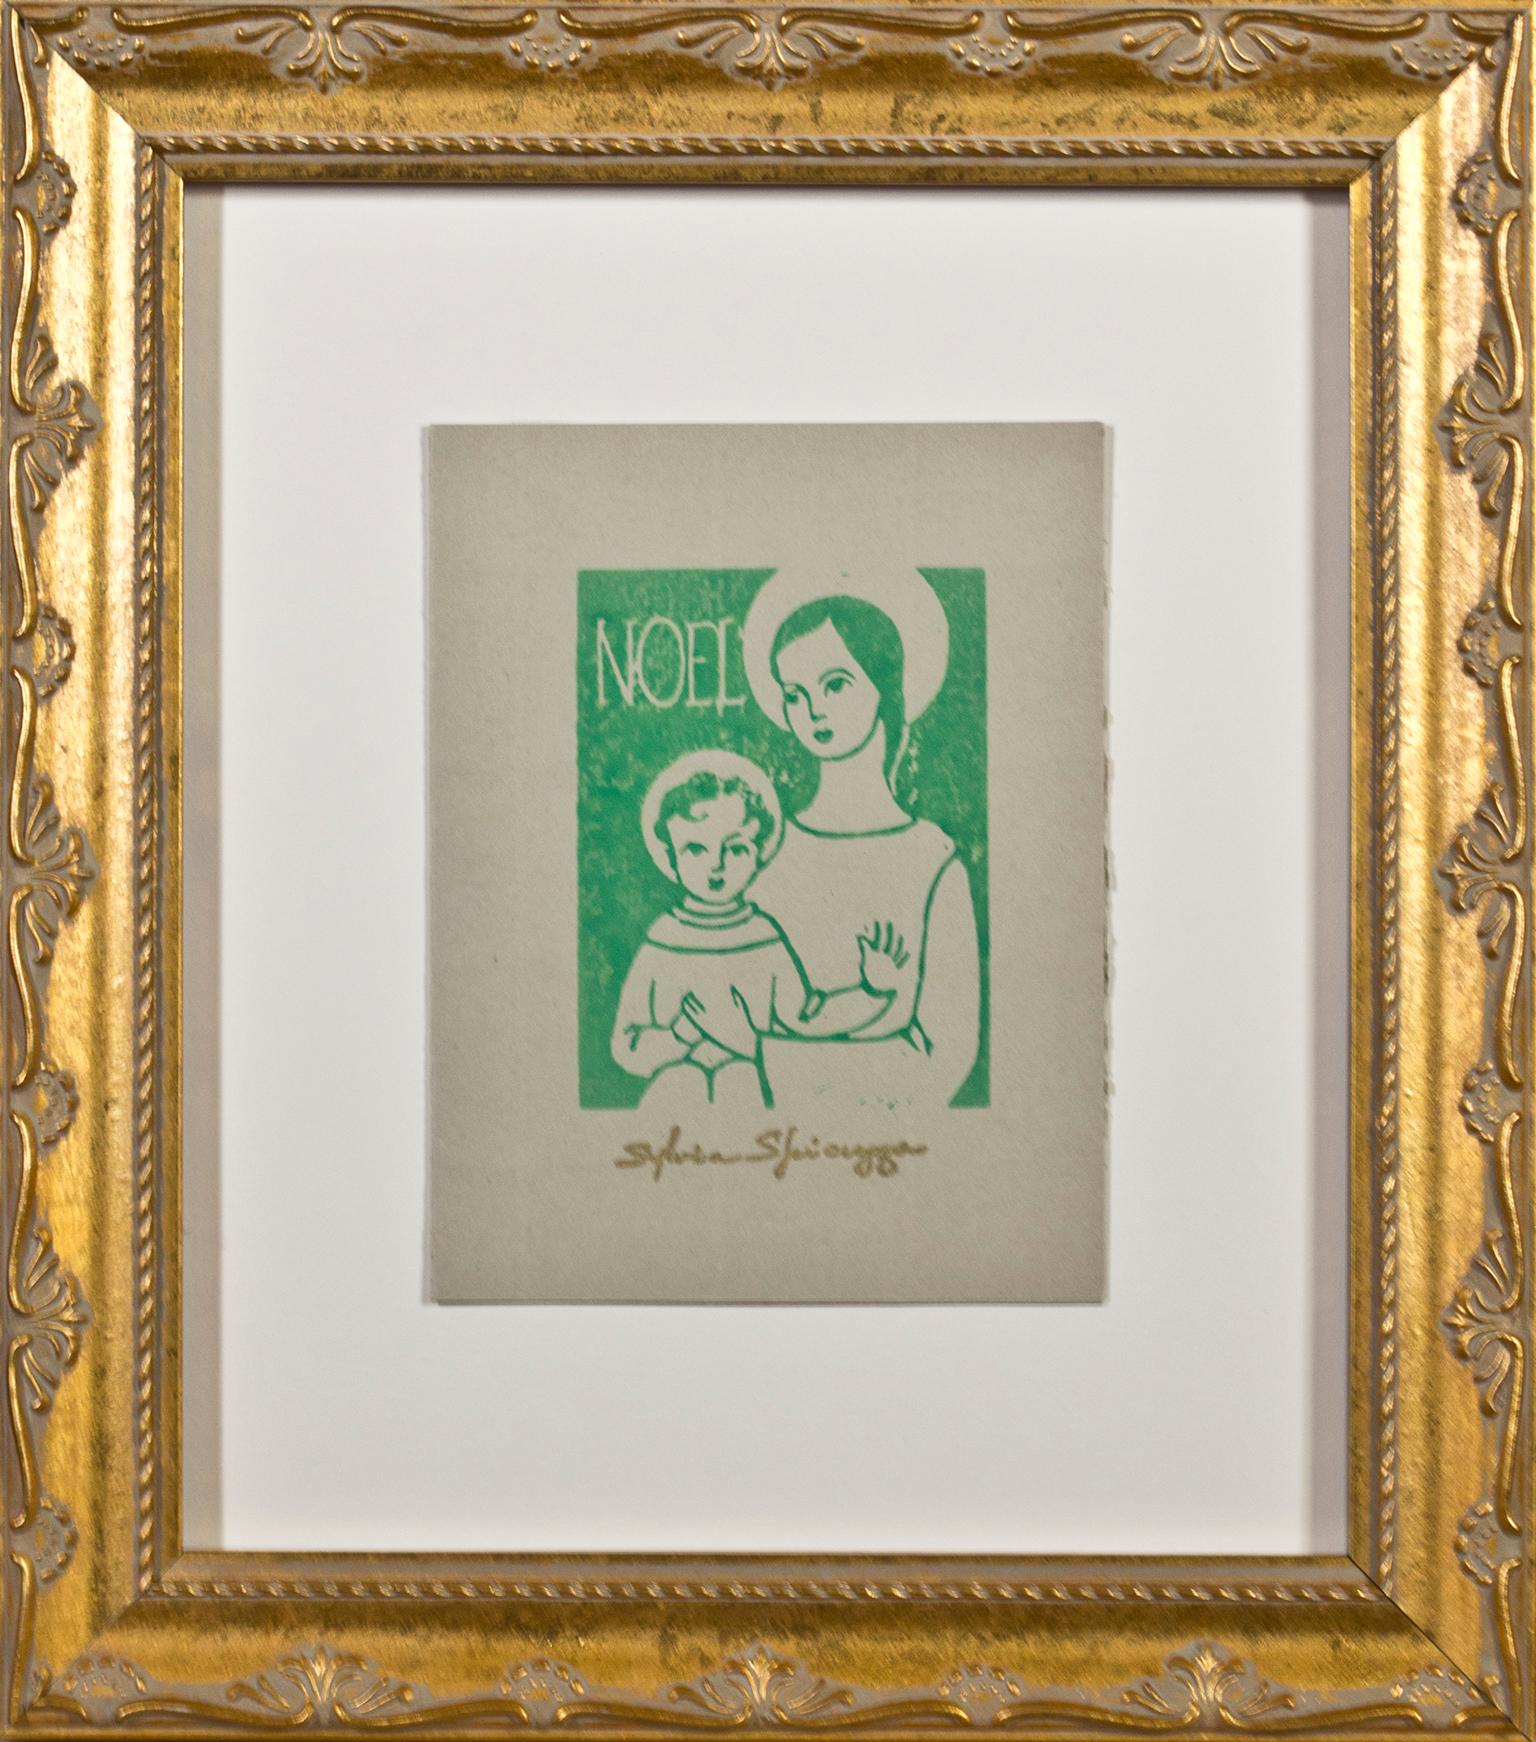 "Noel, " Religious Linocut in Green on Tan Paper signed by Sylvia Spicuzza